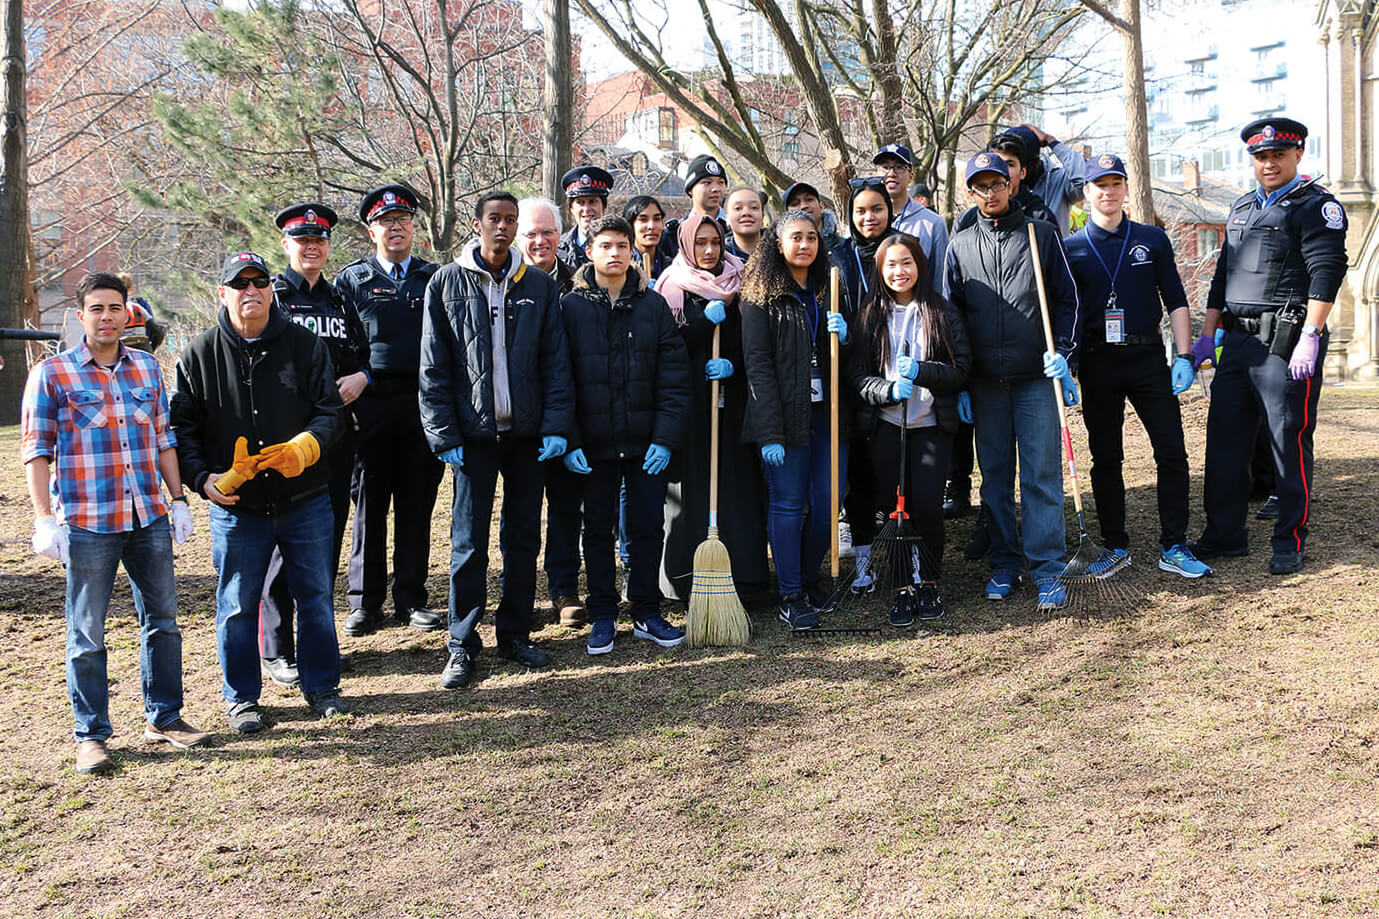 Community volunteers included members of Toronto Police Services and its youth program.